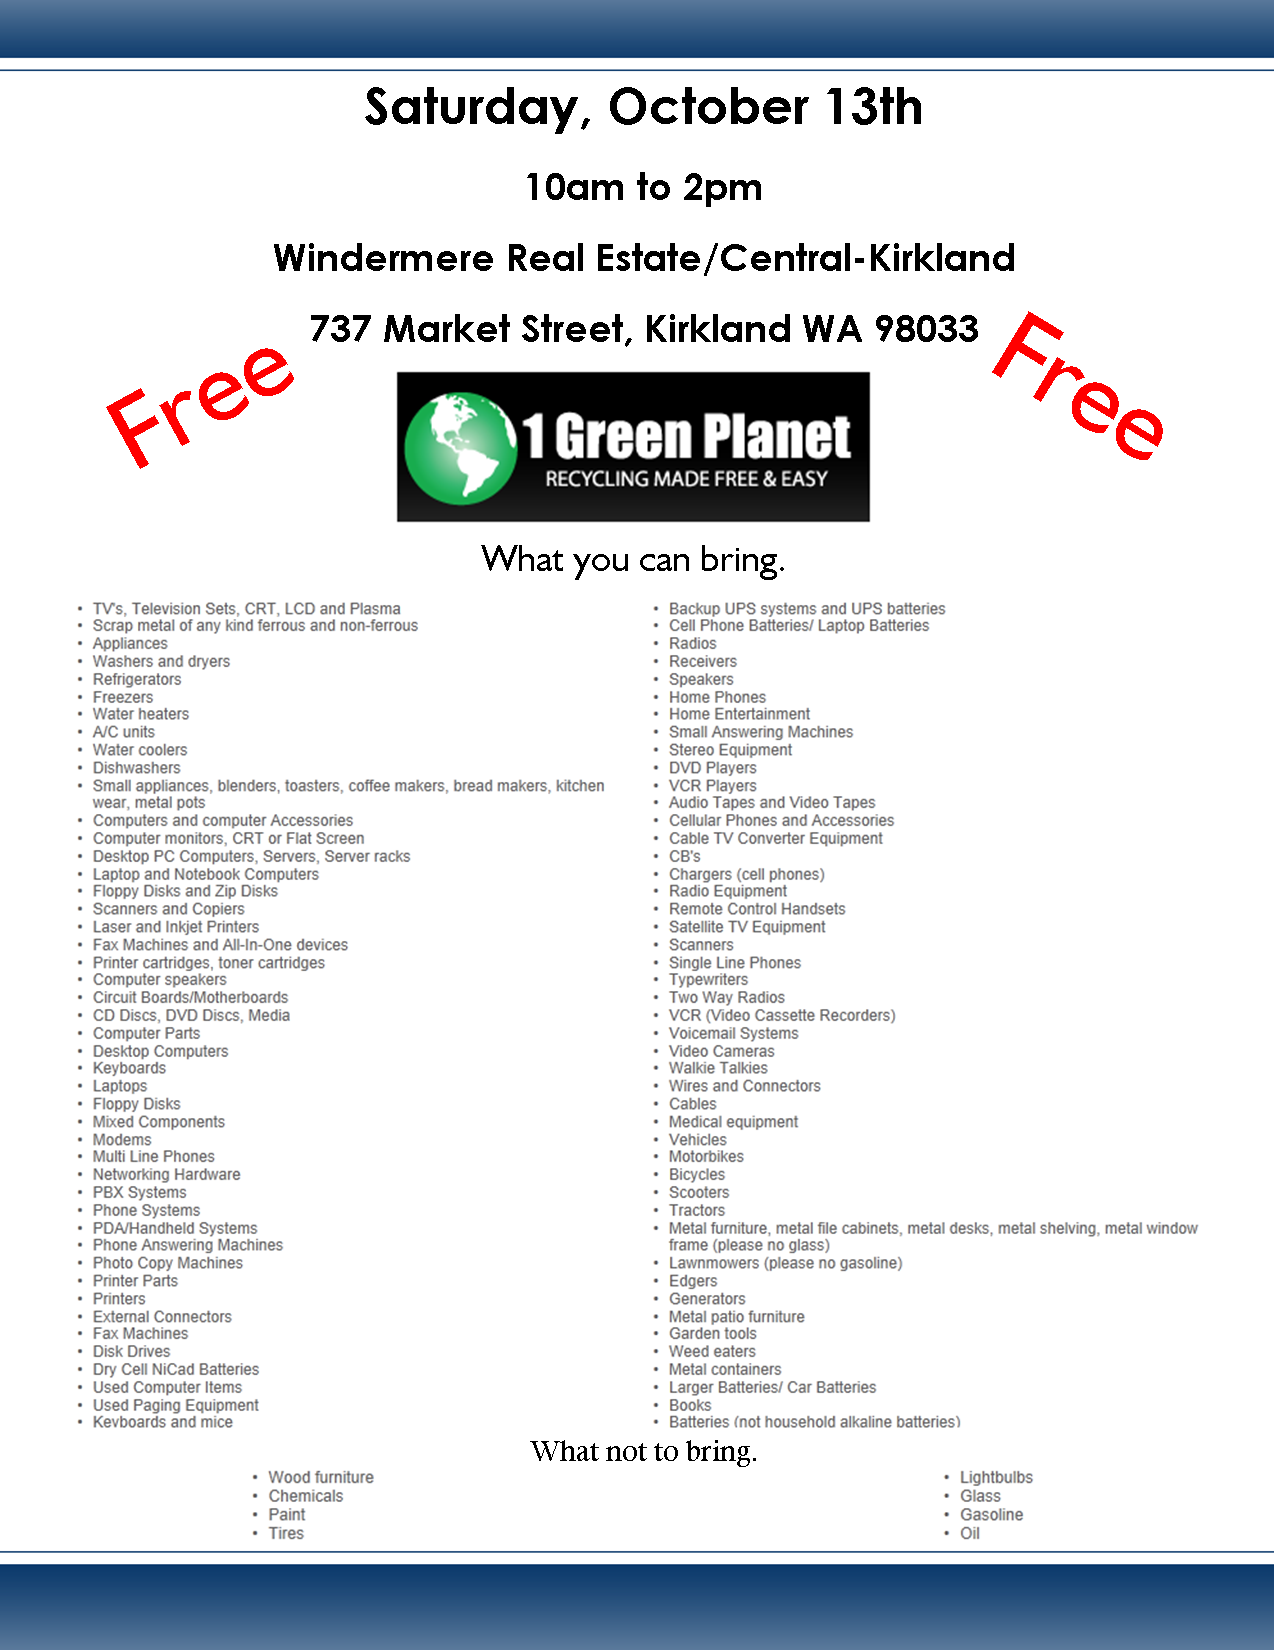 1-Green-Planet-10-13-12-Free.png